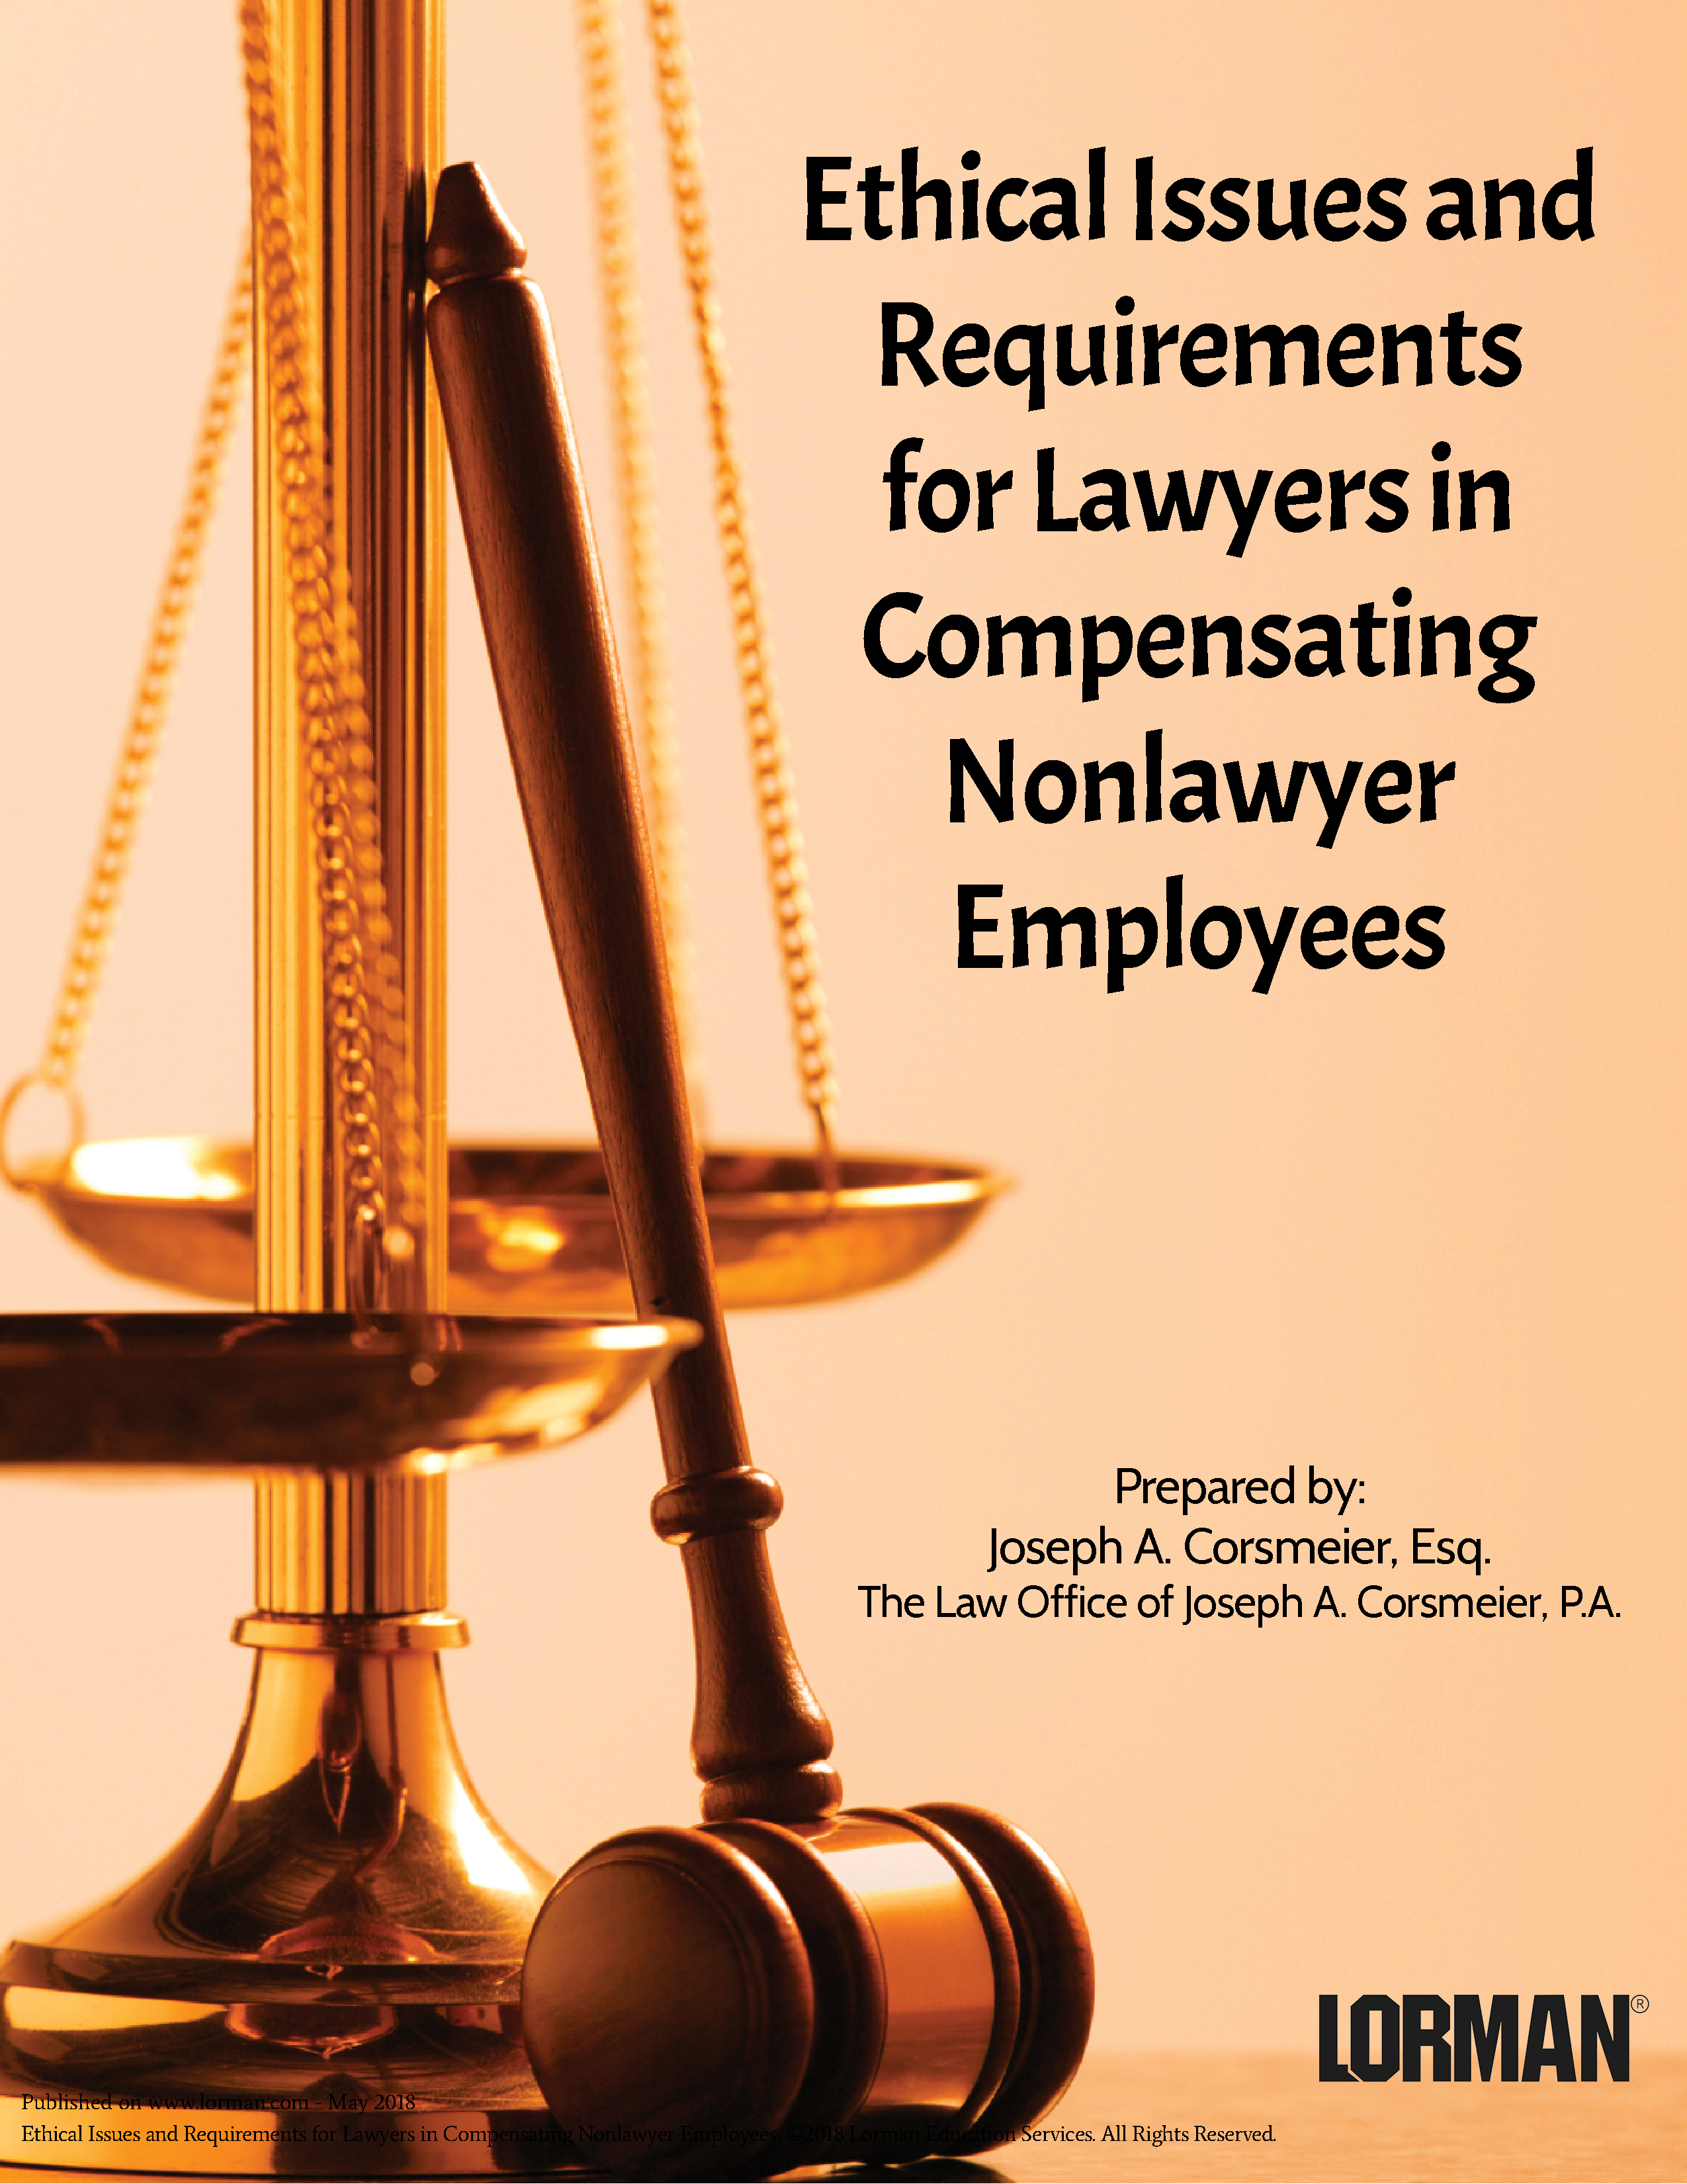 Ethical Issues and Requirements for Lawyers in Compensating Nonlawyer Employees